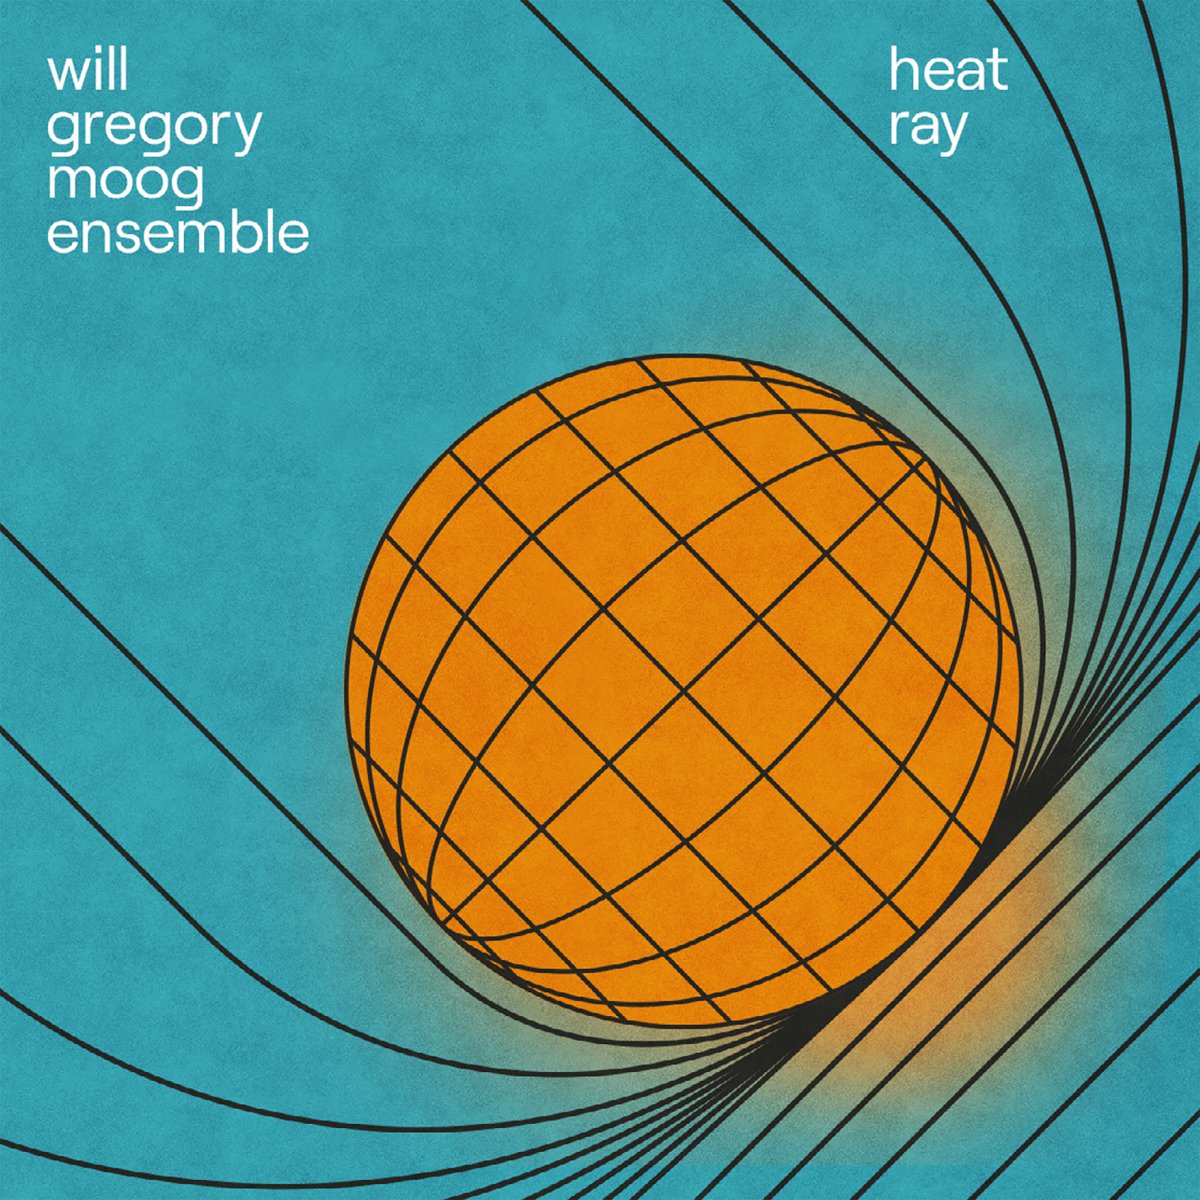 Today, @WillGregoryMoog announces upcoming album ‘Heat Ray’, scheduled to be released on June 14th, and releases first taste ‘Young Archimedes’, available to stream and download on all music platforms.